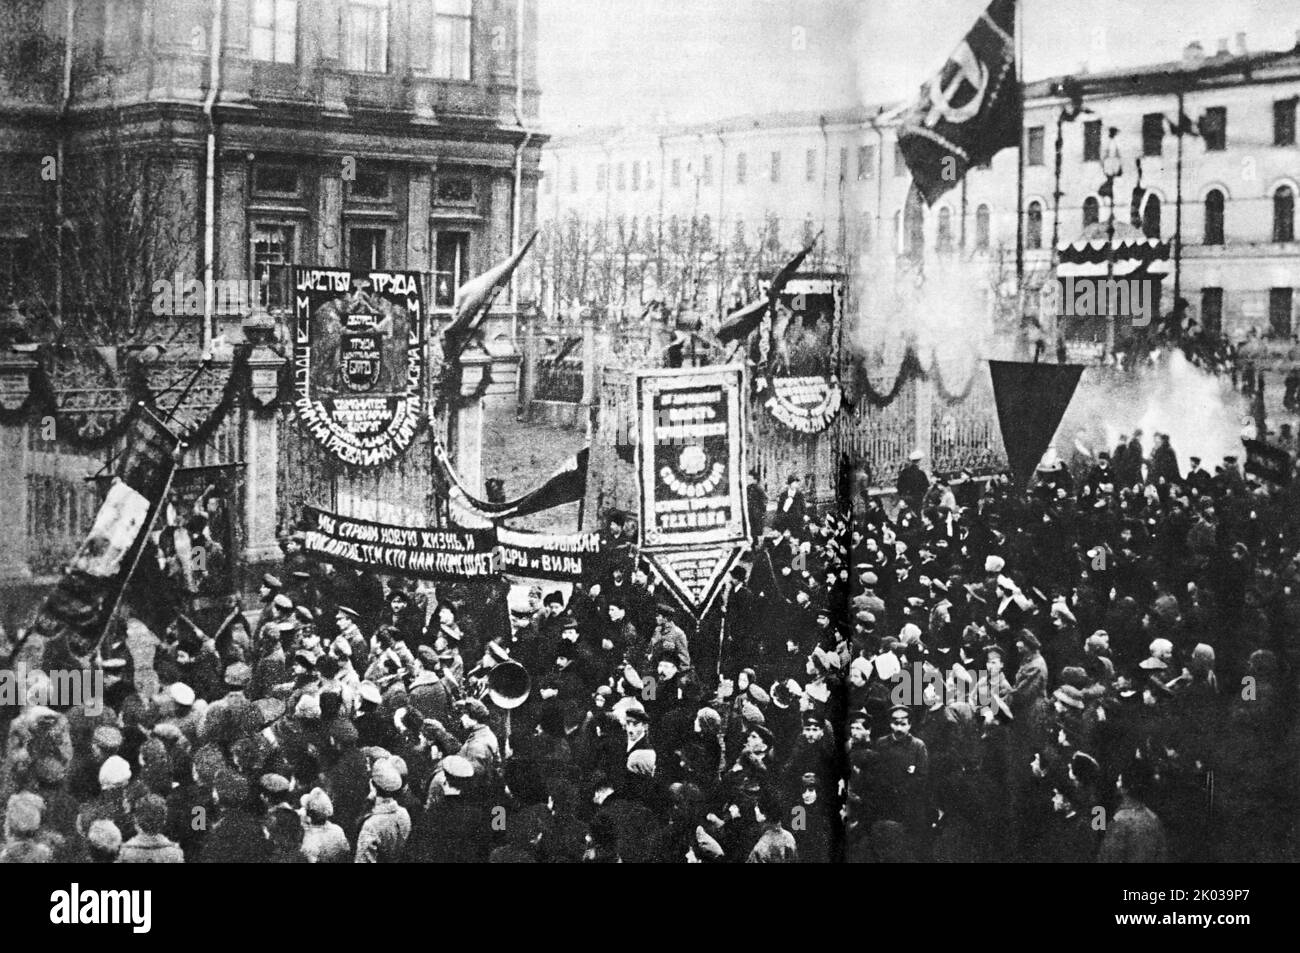 Opening of the Palace of Labour. Petrograd, 1918. Photo by P. Otsup. Stock Photo